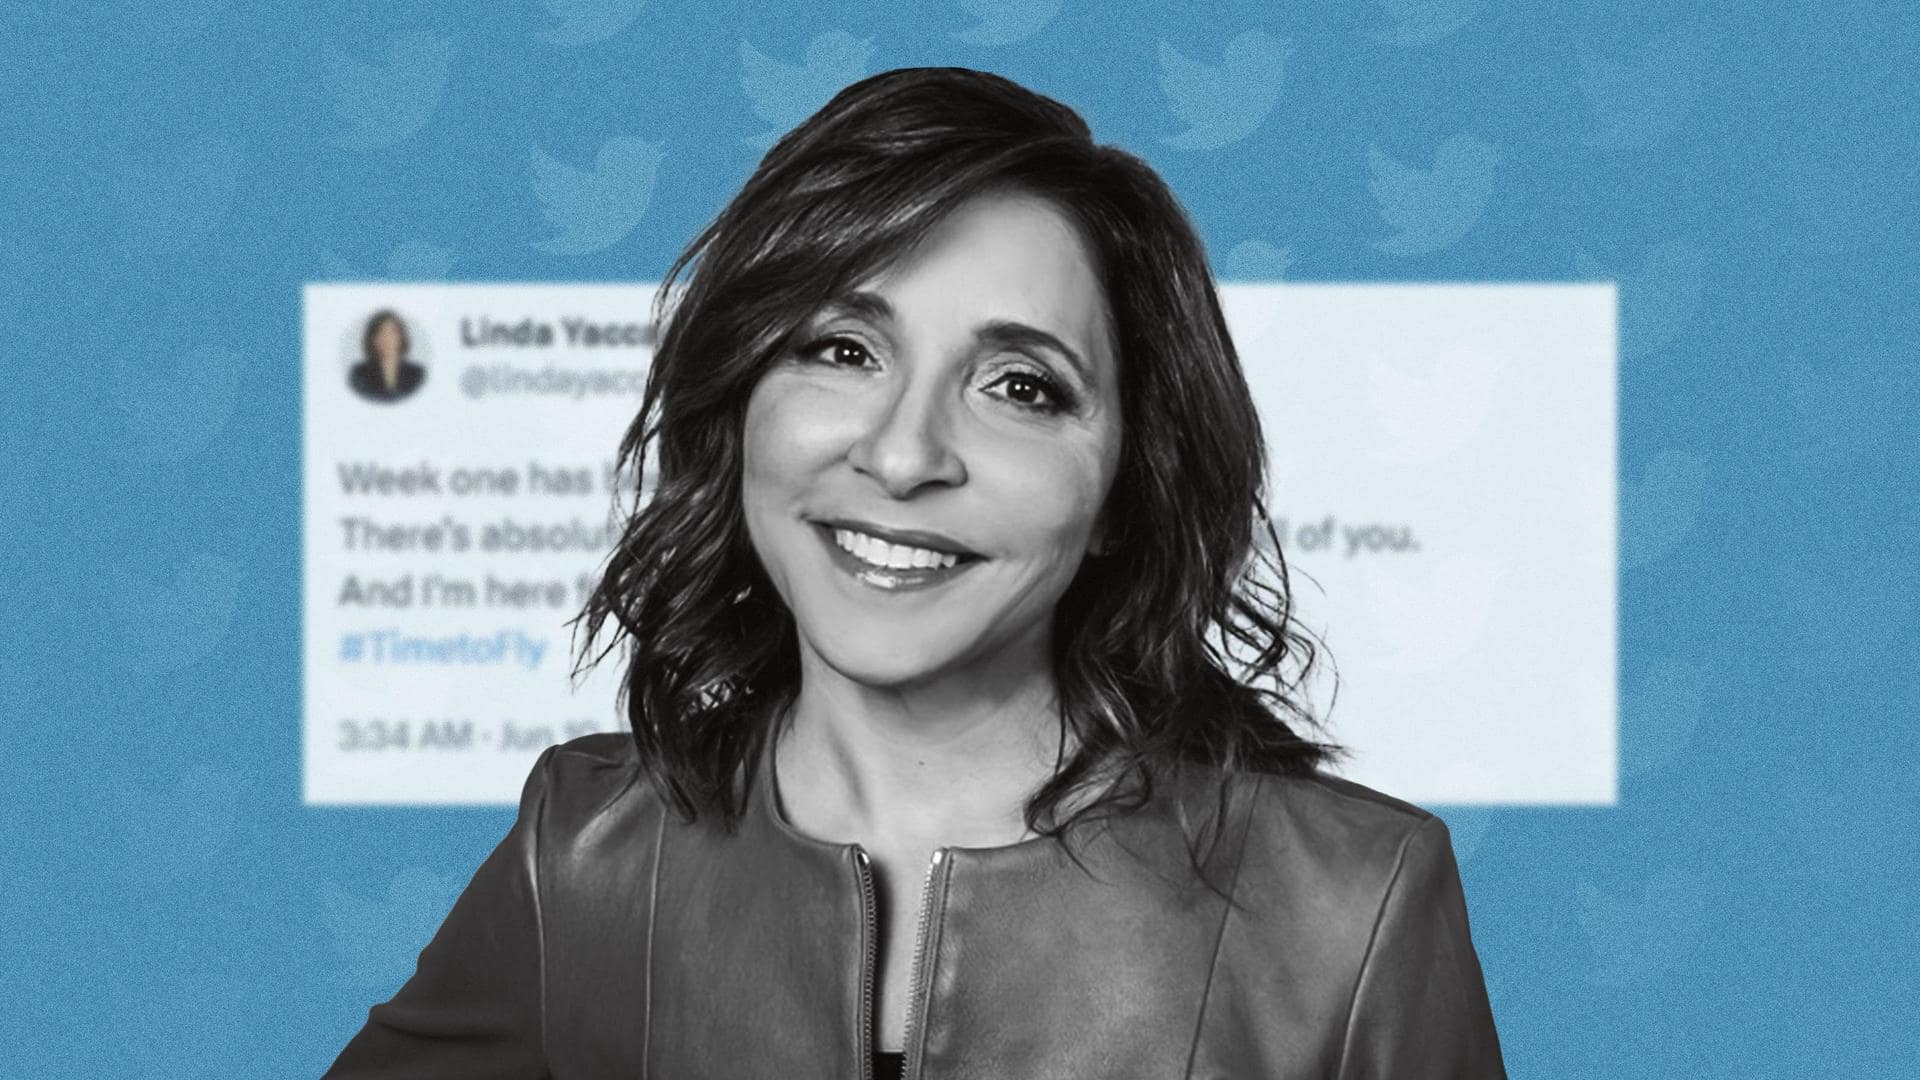 Linda Yaccarino envisions Twitter as 'world's most-accurate real-time information source'